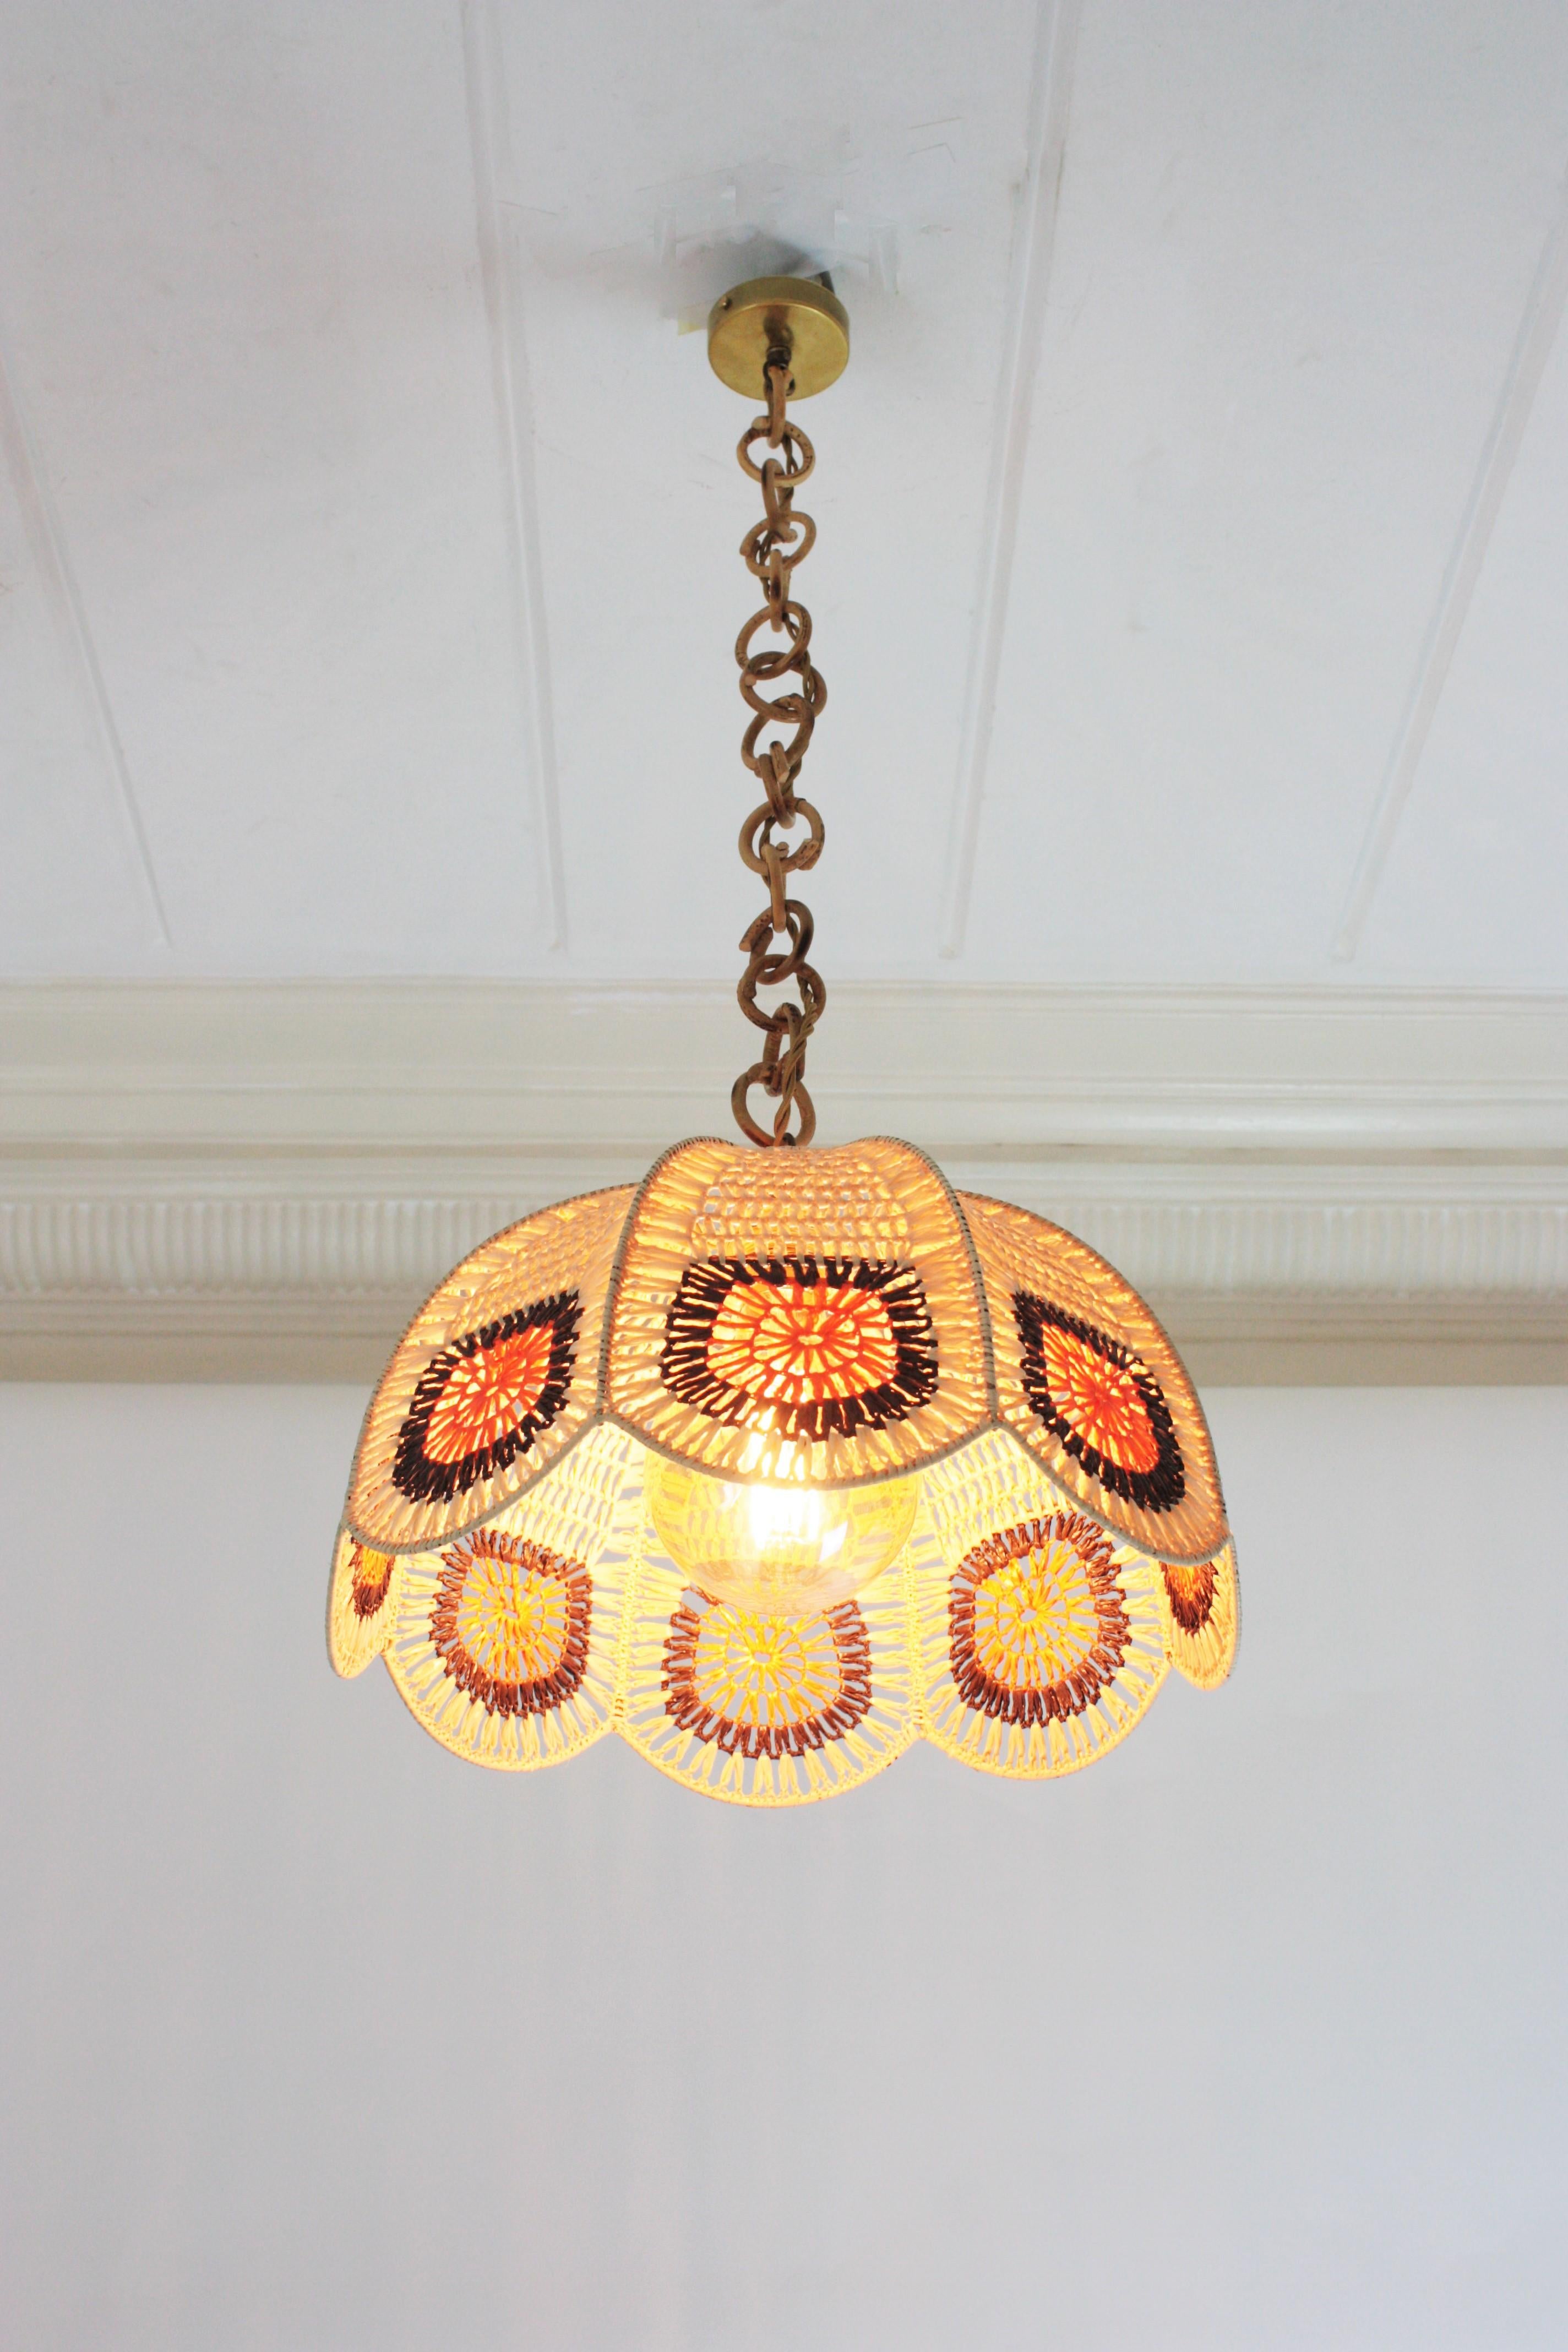 20th Century Spanish Modernist Pendant Lamp in Beige, Orange and Brown Macrame For Sale